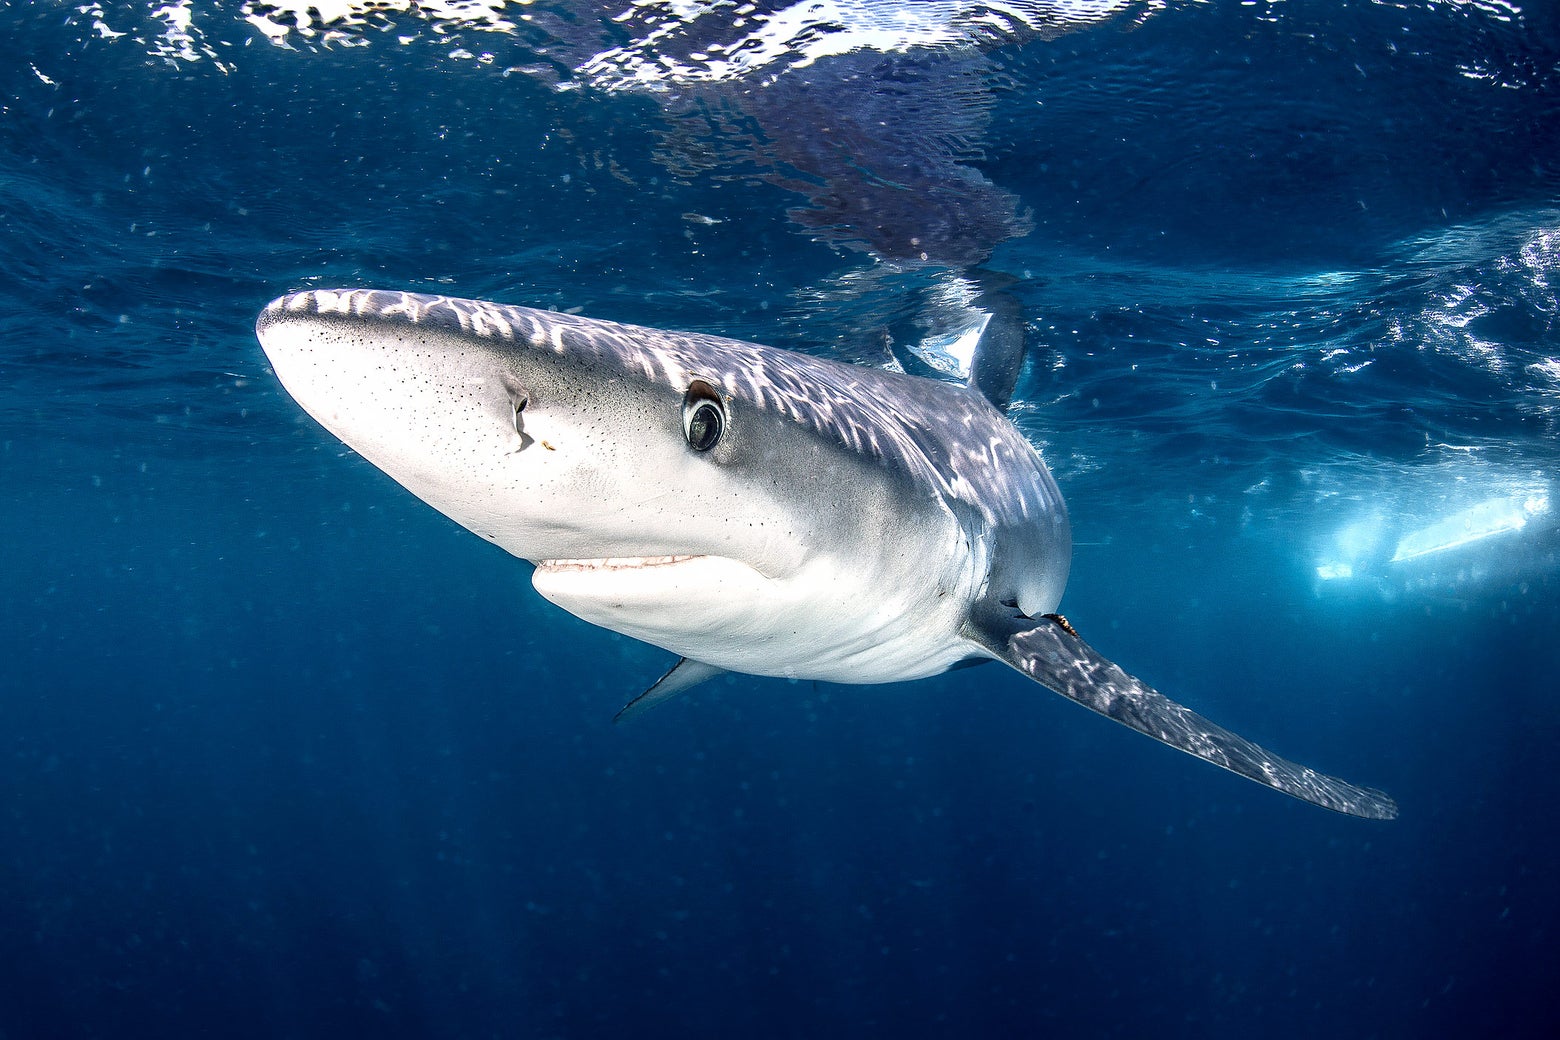 Marine biologist swims with 20 foot long great white shark